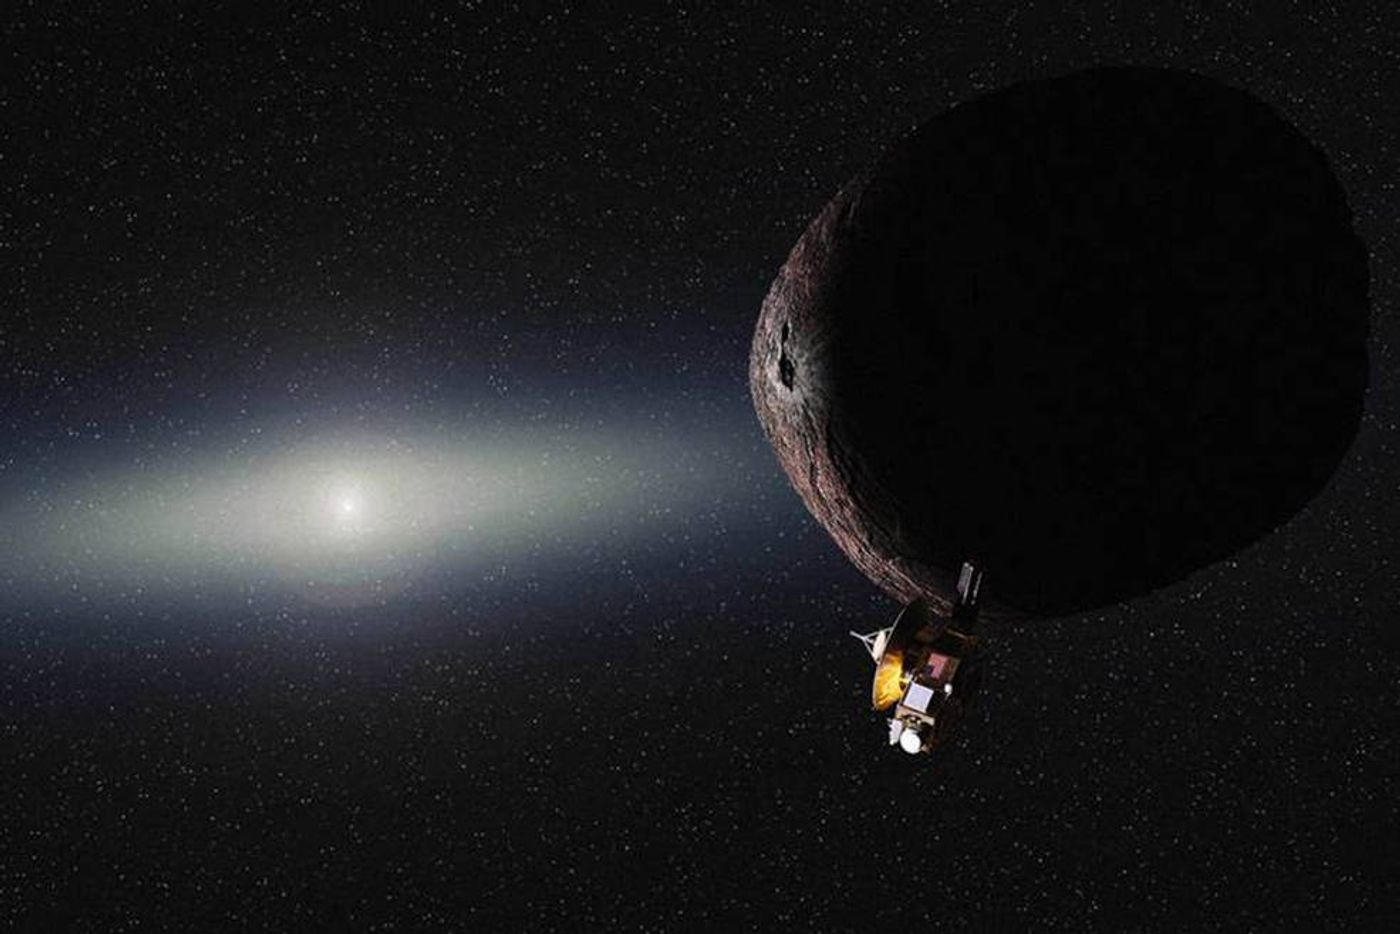 NASA has chosen a possible new object to examine with the New Horizons spacecraft; a Kuiper Belt Object (KBO).